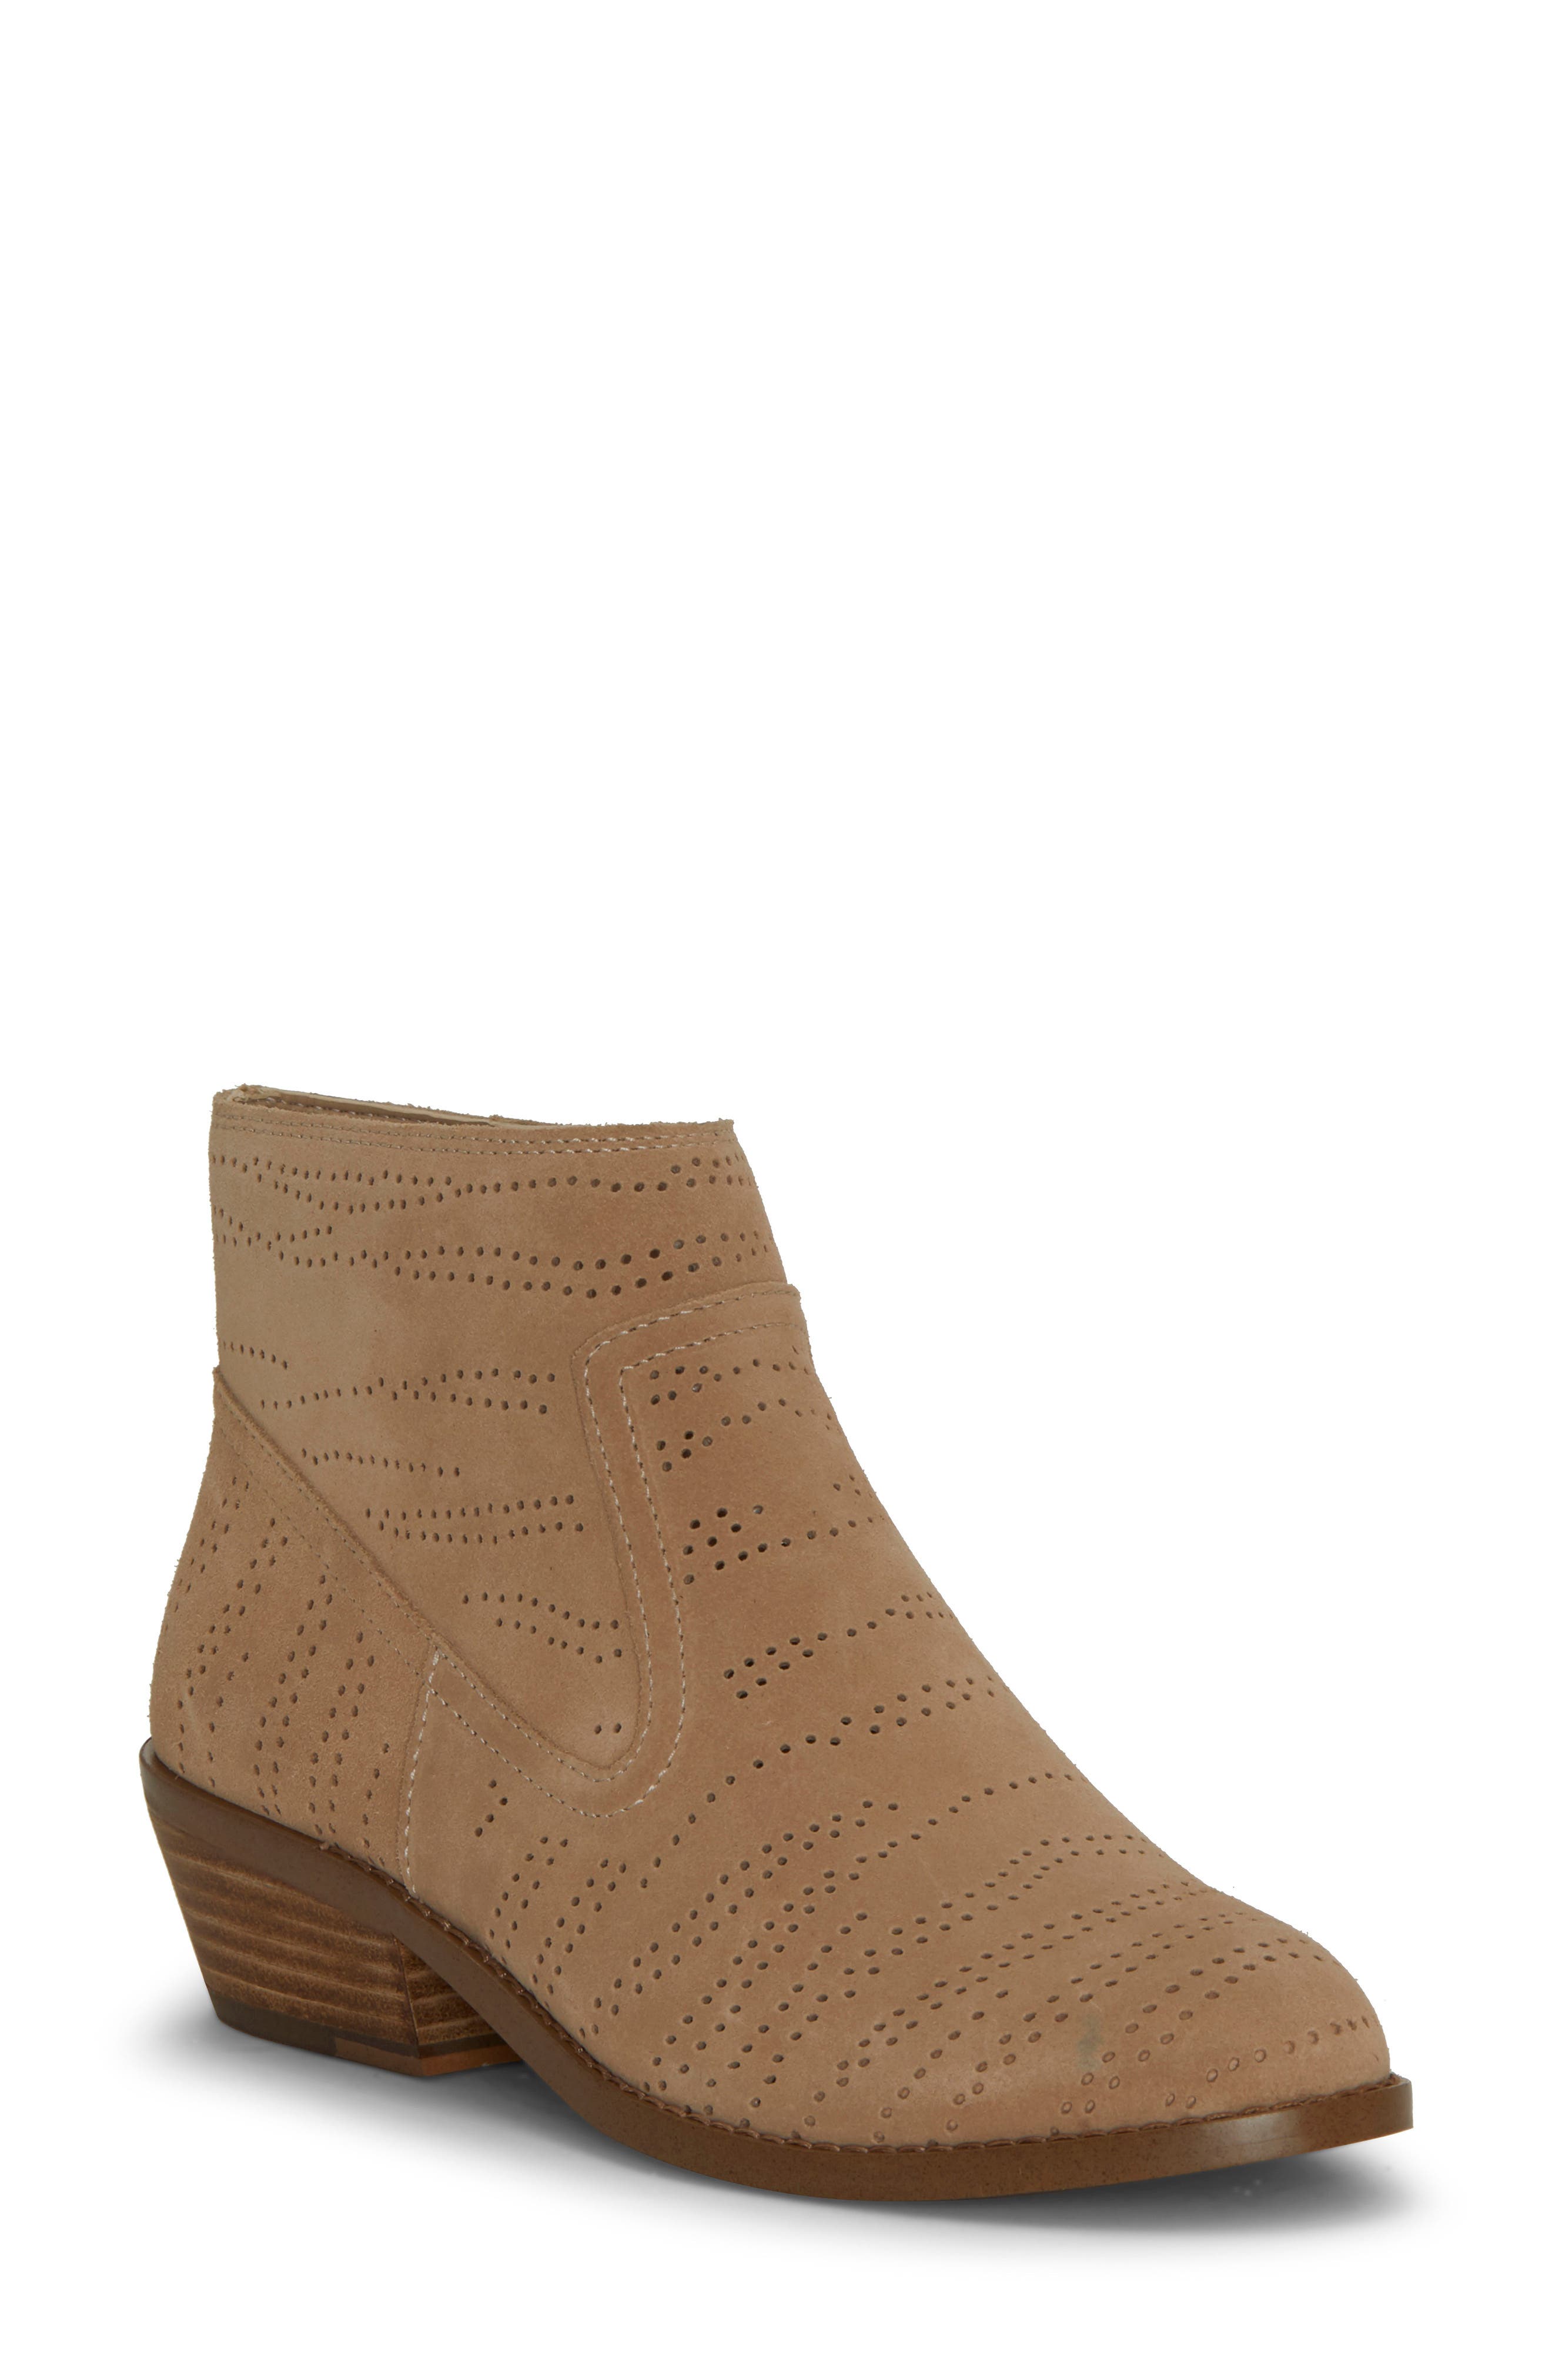 perforated leather booties